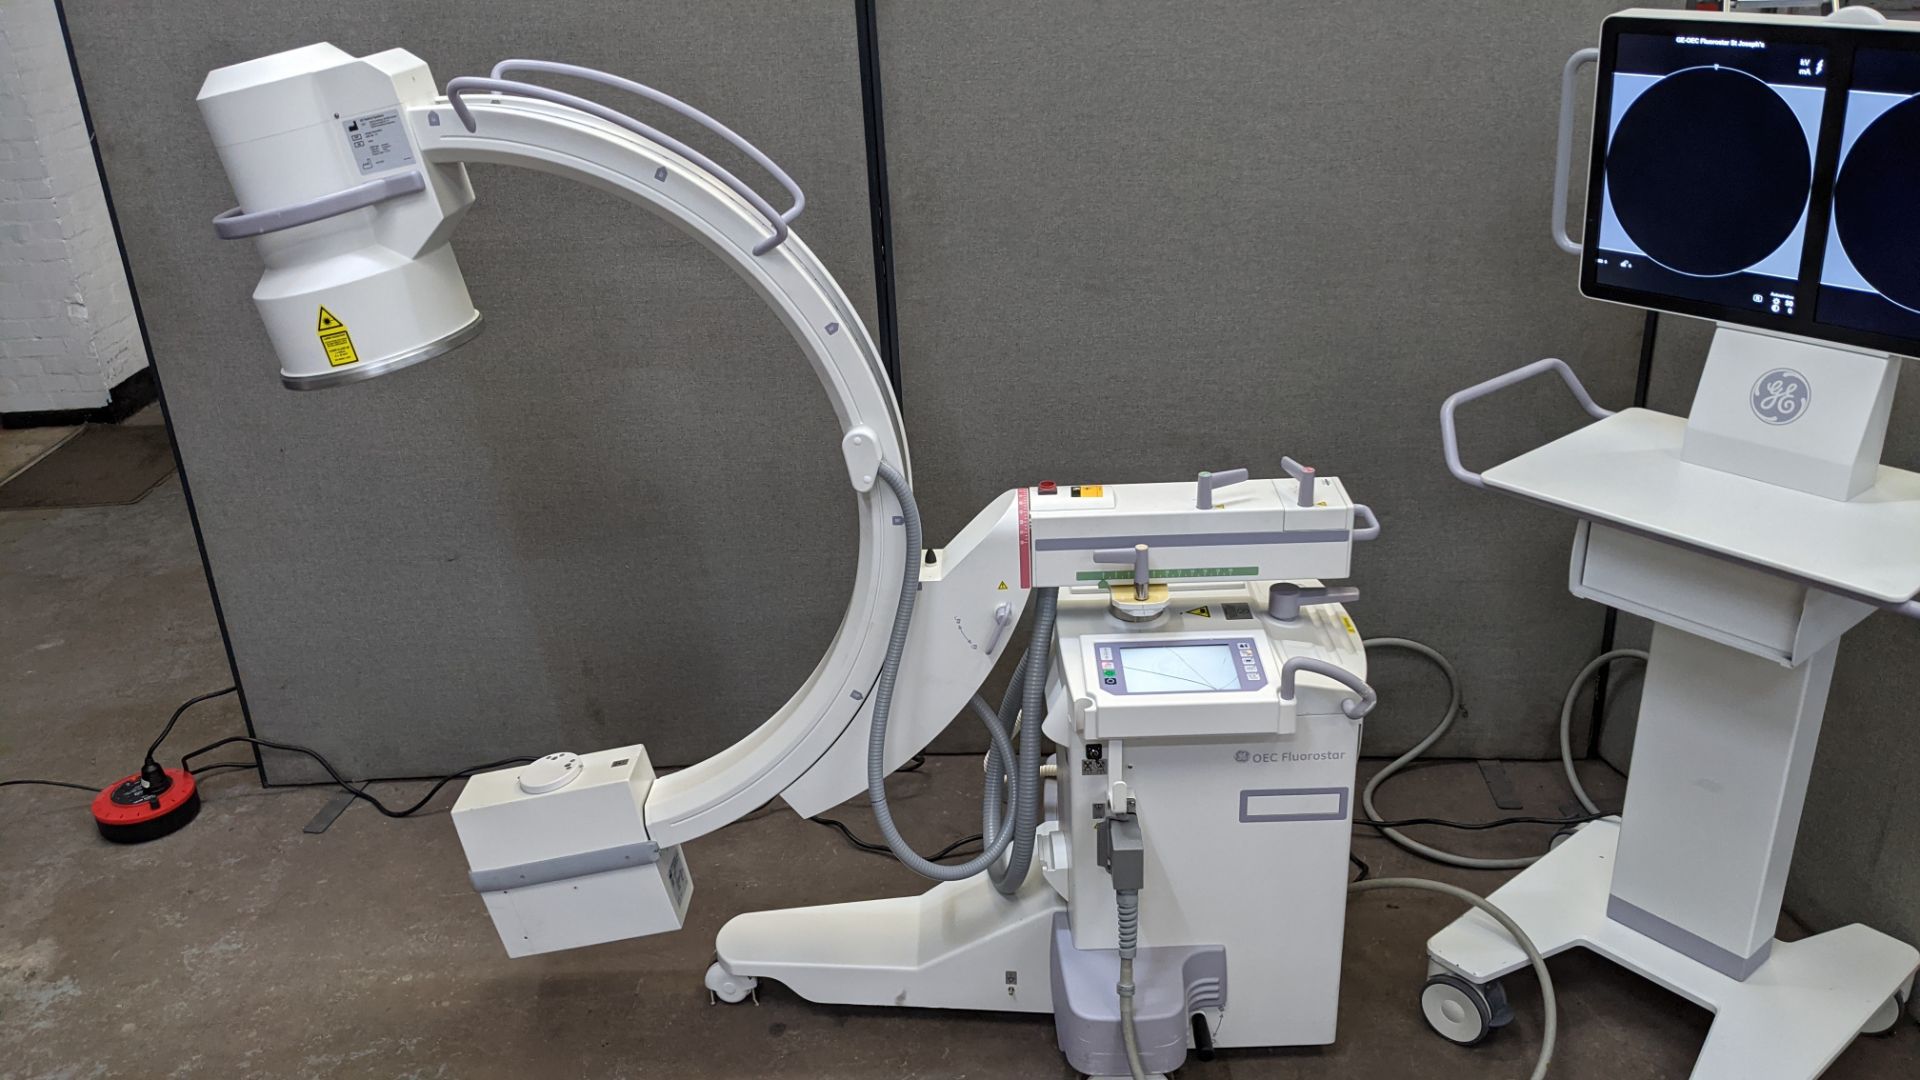 GE-OEC Fluorostar imaging system, purchased new in August 2017. EO4 Series. - Image 8 of 68